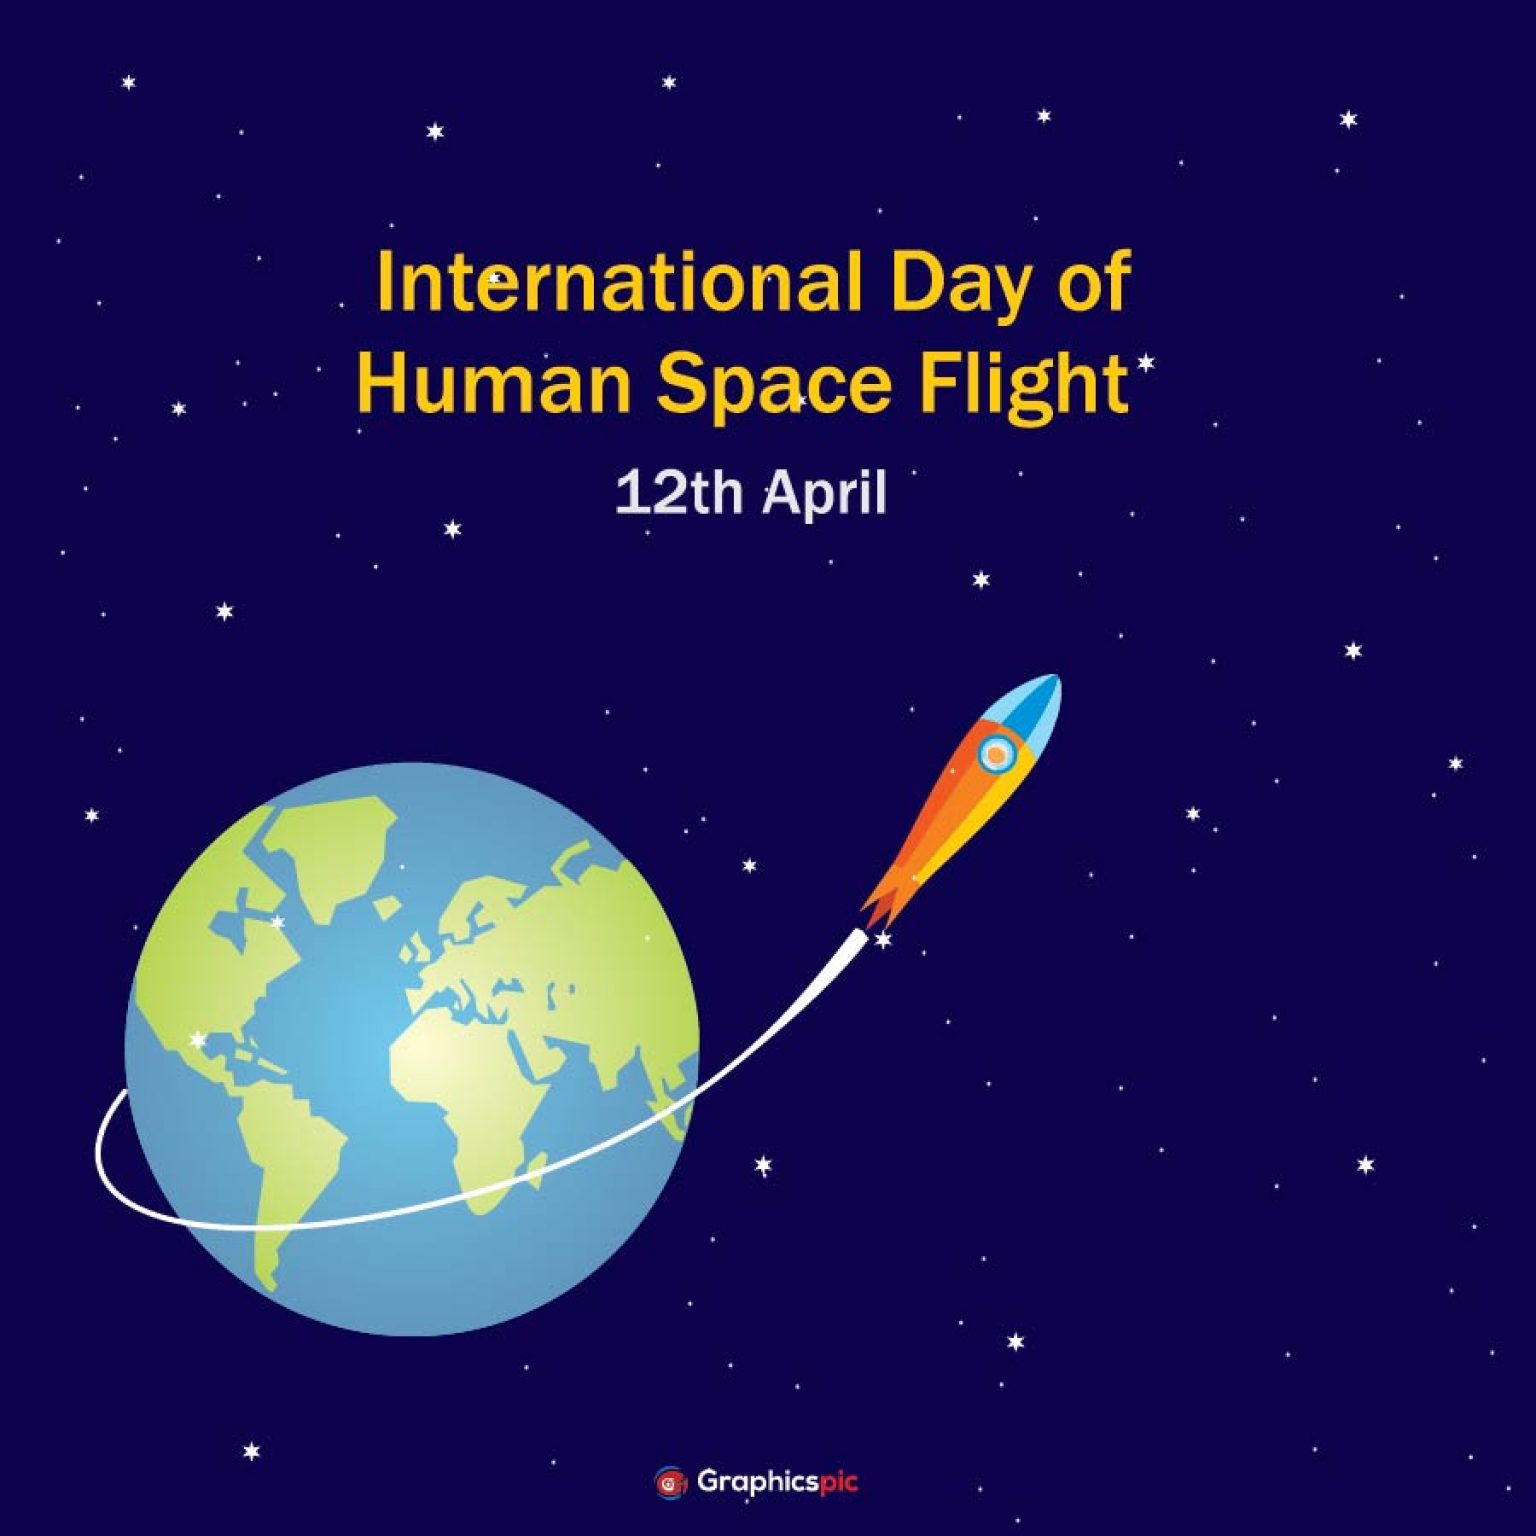 International day of human space flight with rocket & earth picture